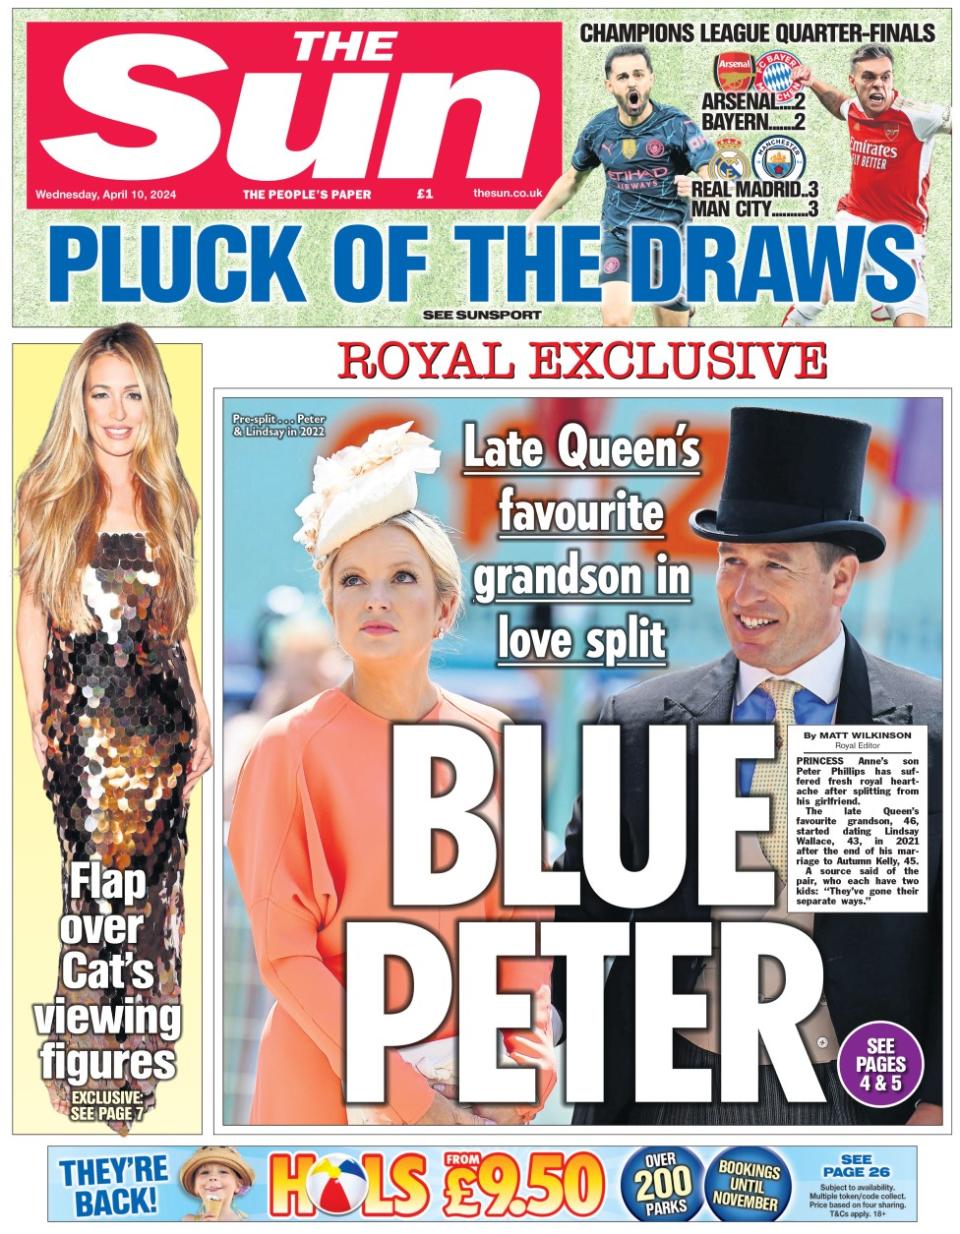 The headline in the Sun reads: Blue Peter